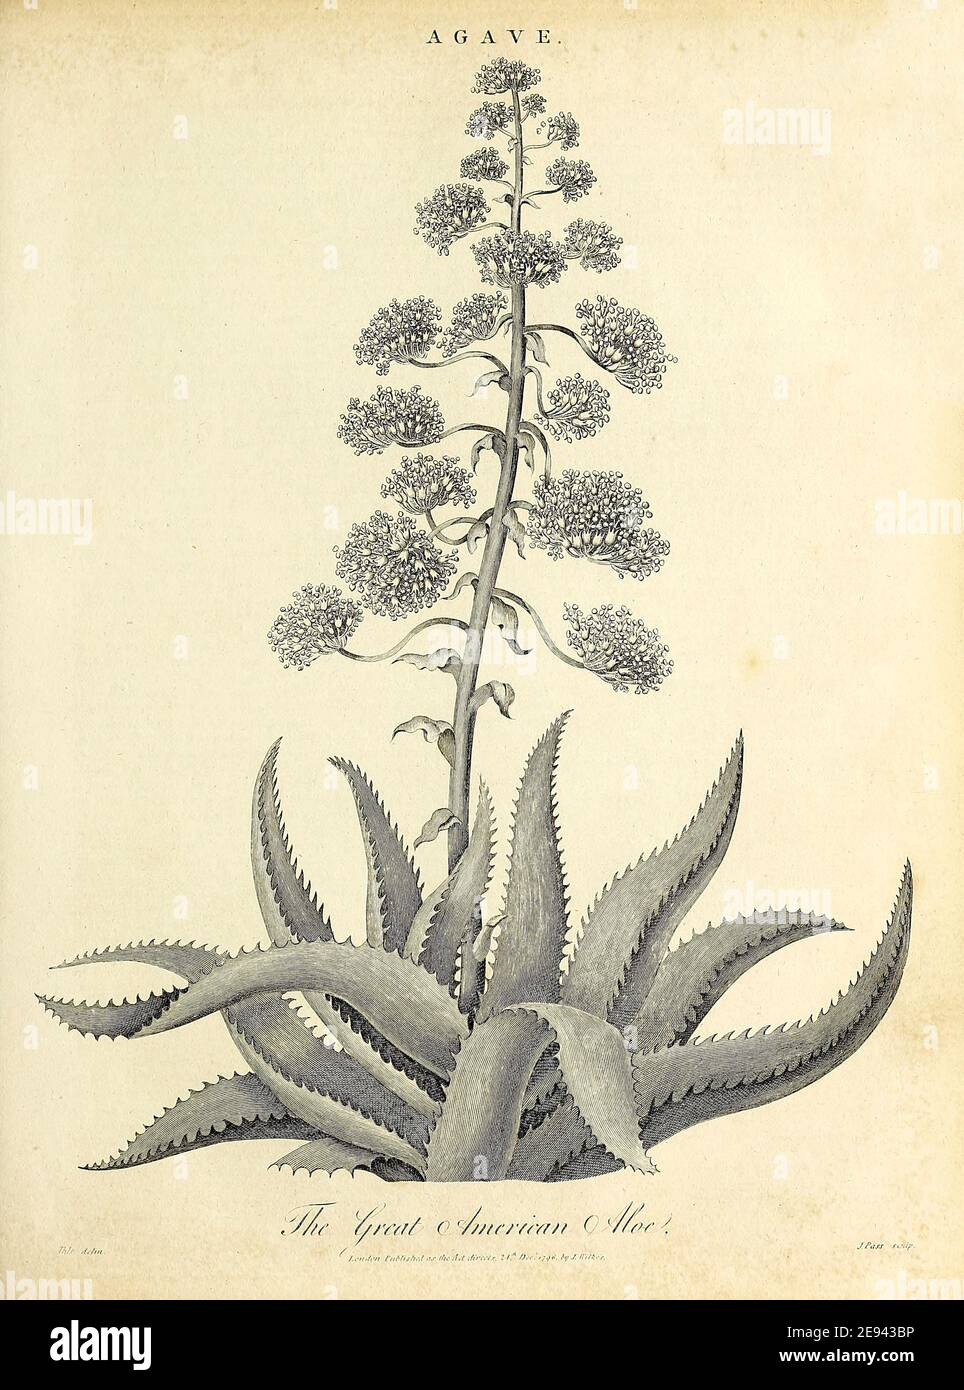 Agave is a genus of monocots native to the hot and arid regions of the Americas, although some Agave species are also native to tropical areas of South America. The genus Agave is primarily known for its succulent and xerophytic species that typically form large rosettes of strong, fleshy leaves. Copperplate engraving From the Encyclopaedia Londinensis or, Universal dictionary of arts, sciences, and literature; Volume I;  Edited by Wilkes, John. Published in London in 1810 Stock Photo